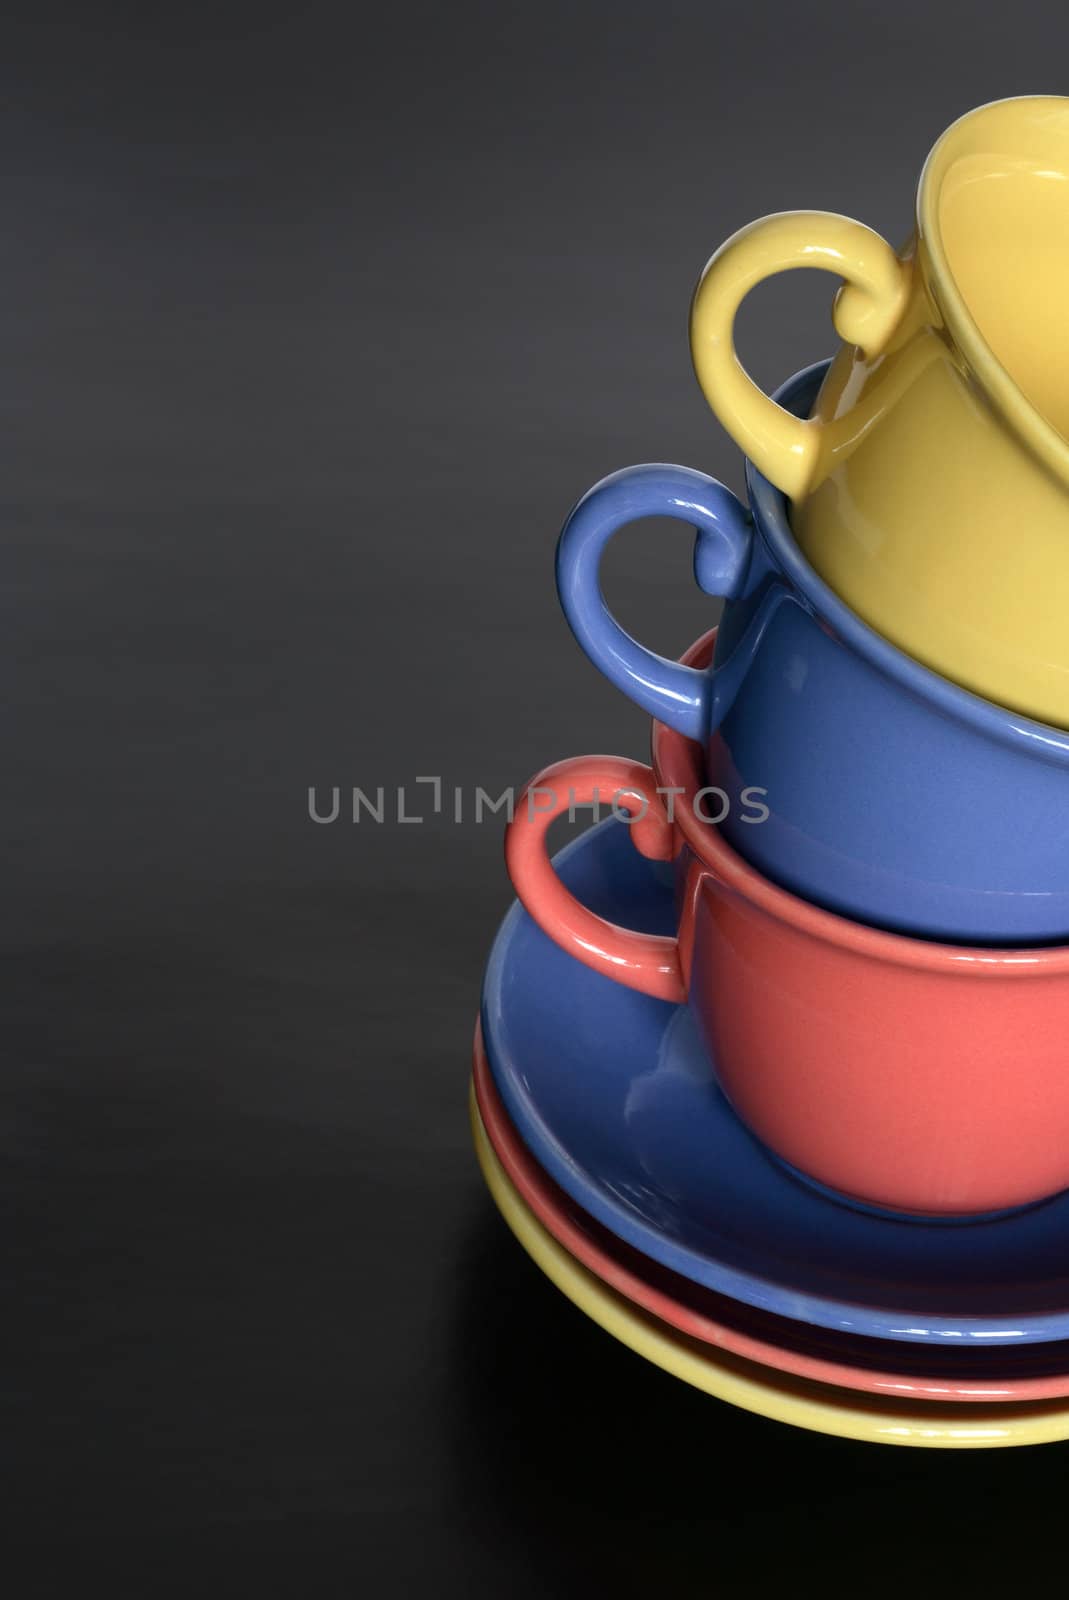 Stack of three motley cups standing on black background with copy space